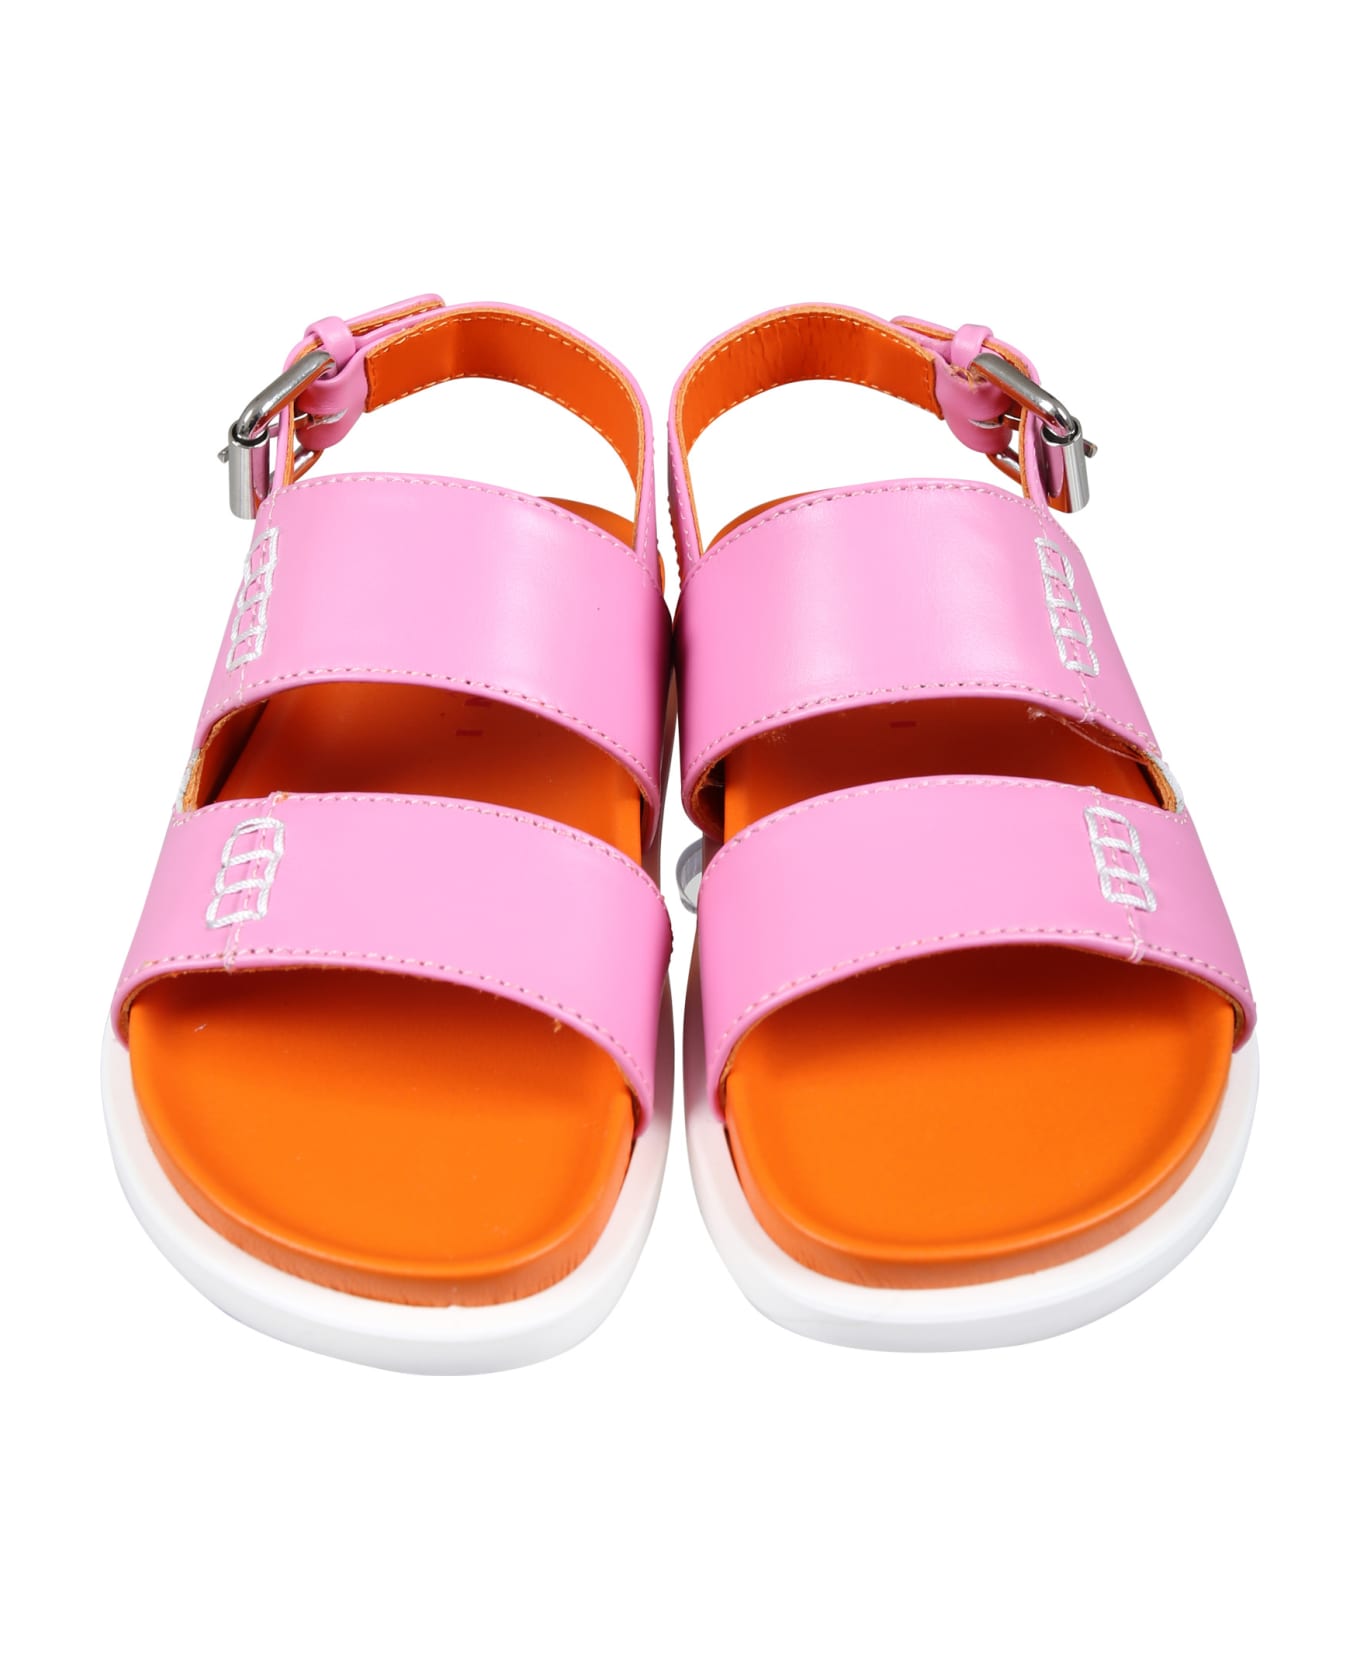 Marni Pink Sandals For Girl With Logo - Pink